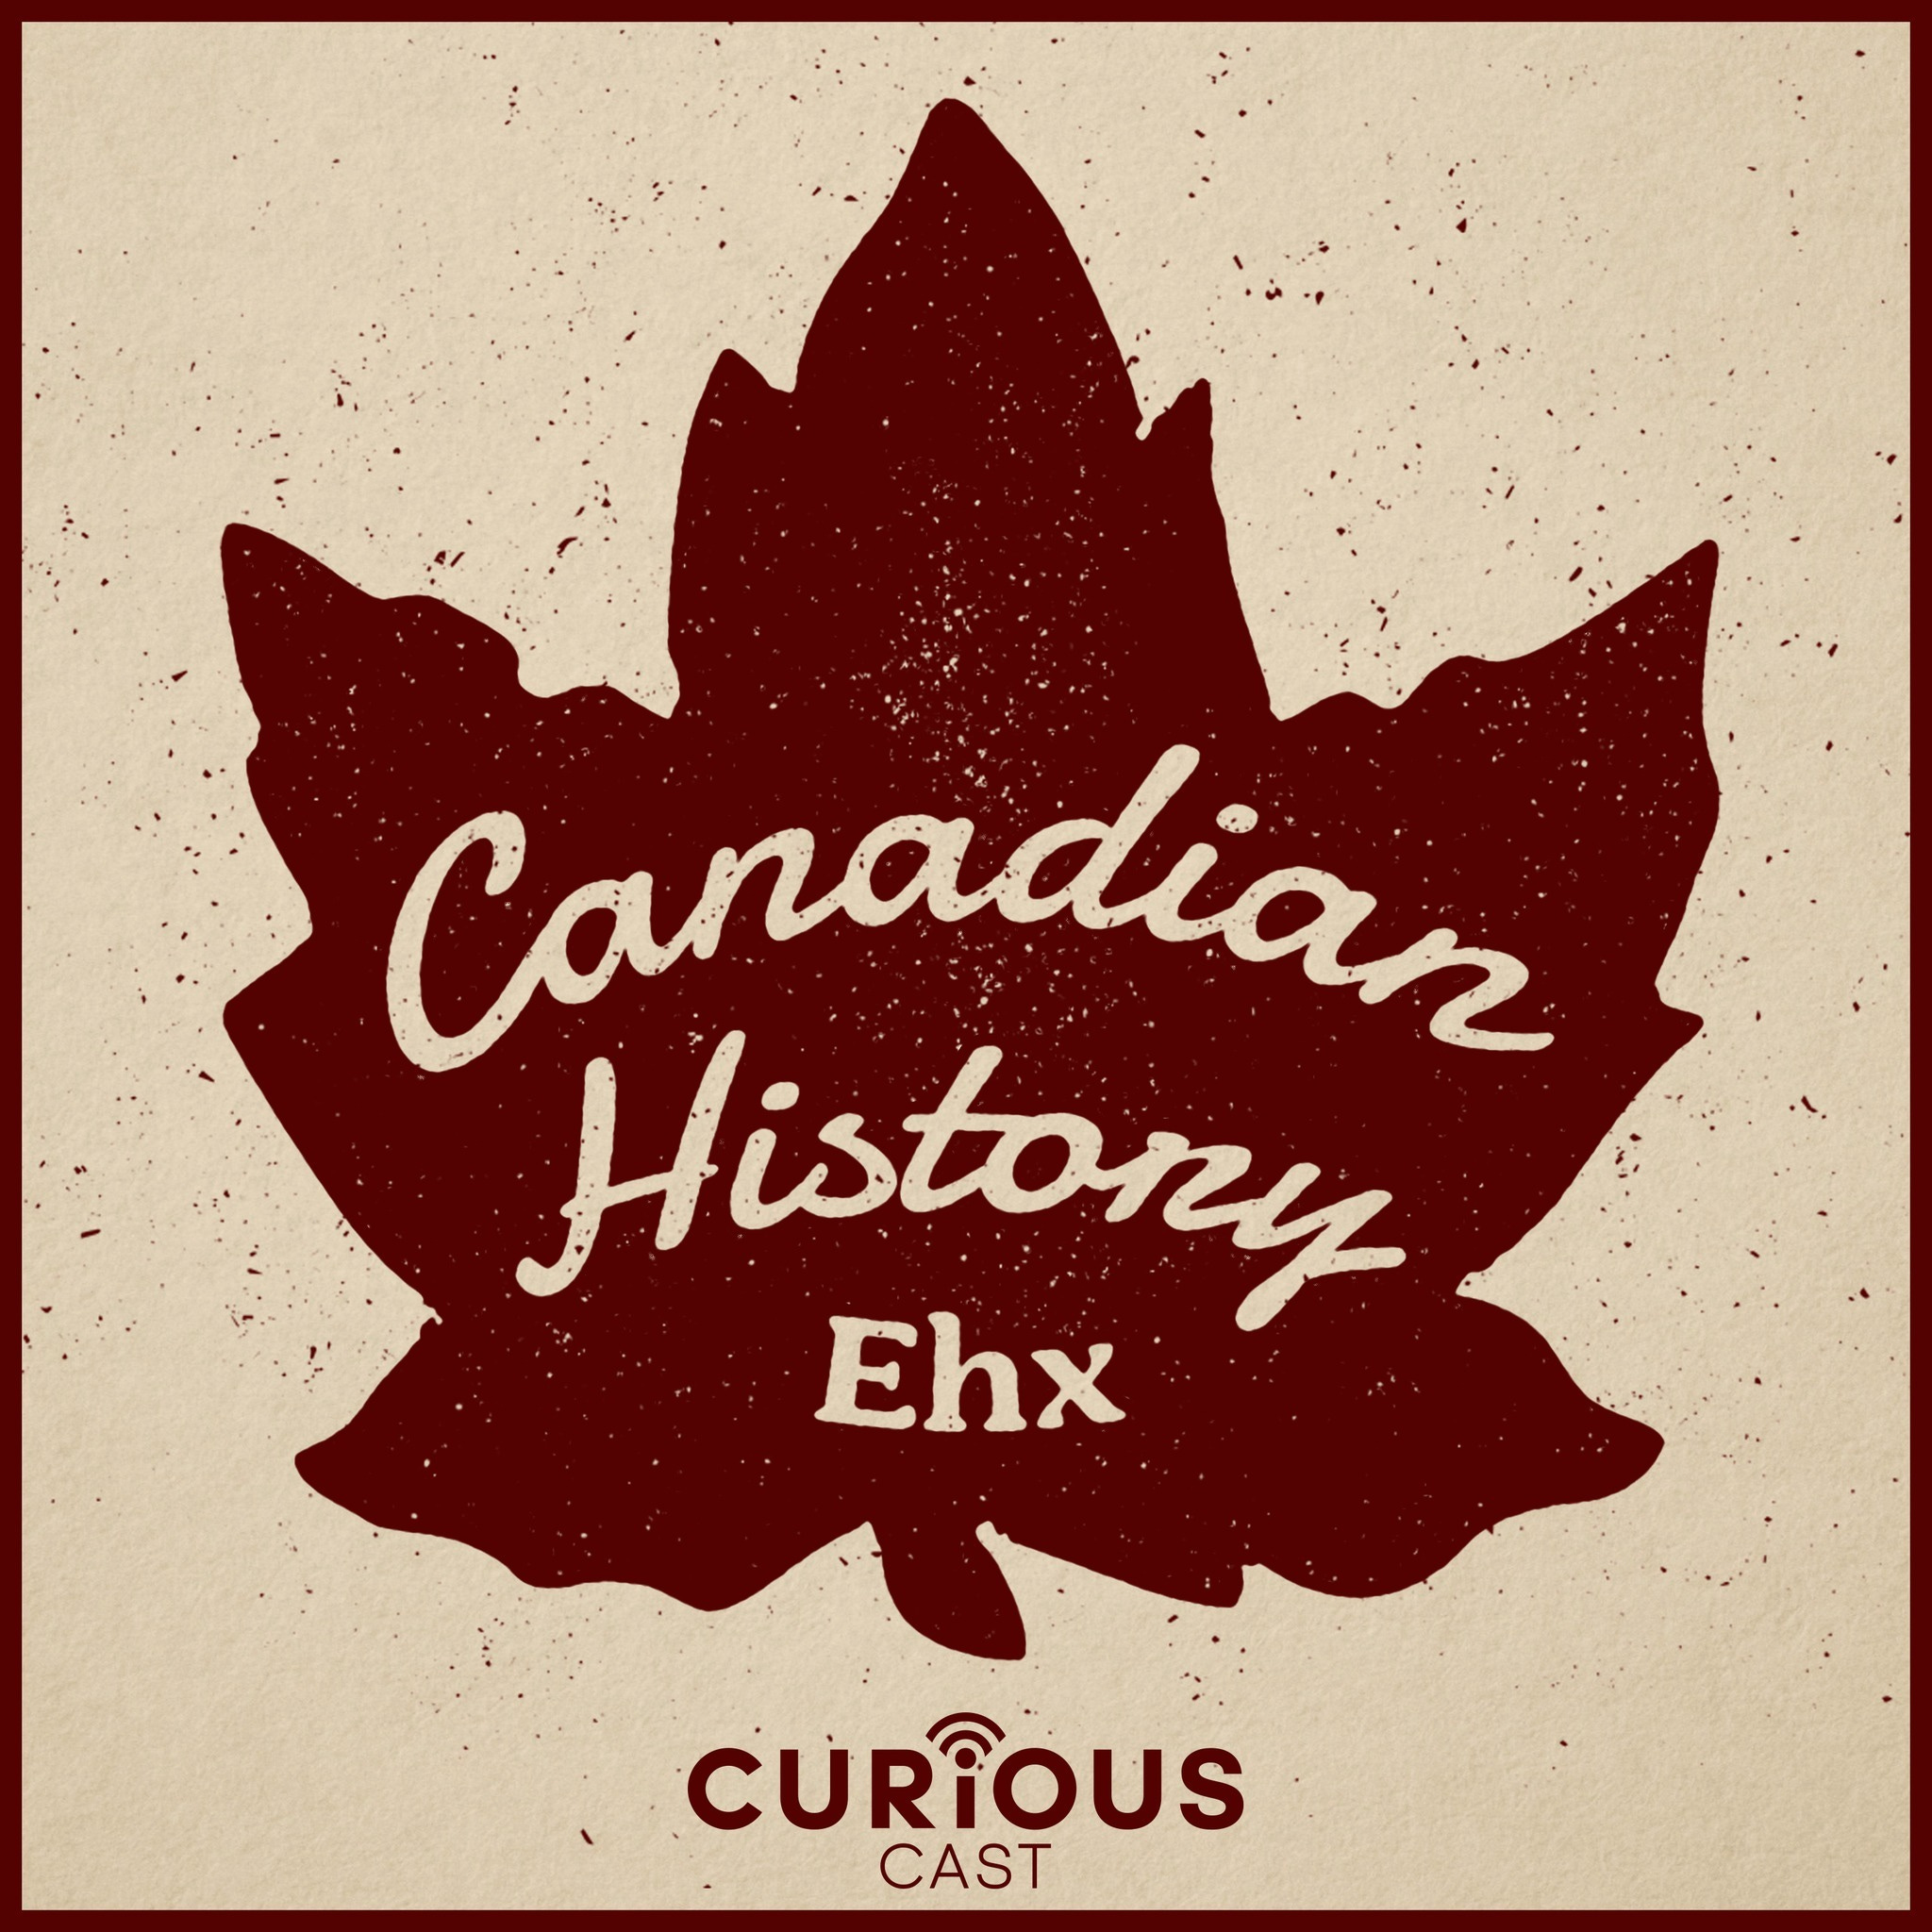 Artwork for Canadian History Ehx